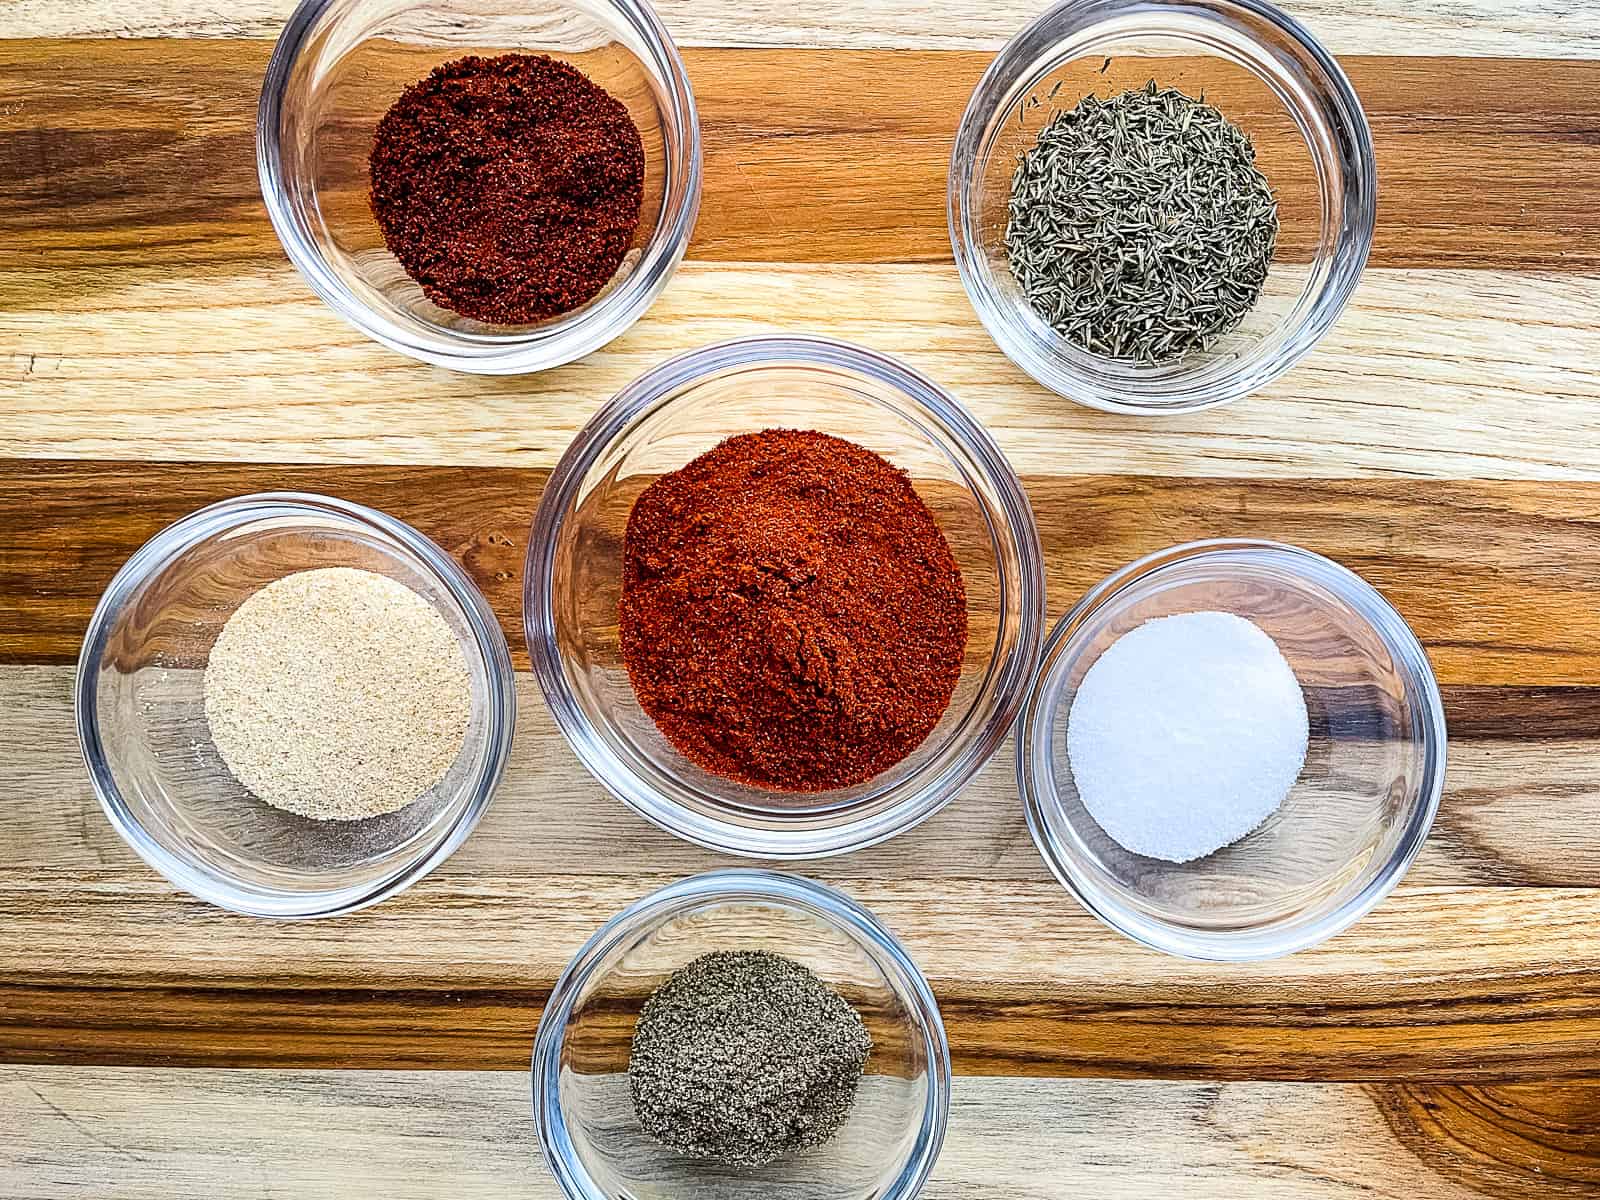 Smoked chicken rub ingredients in individual glass bowls.